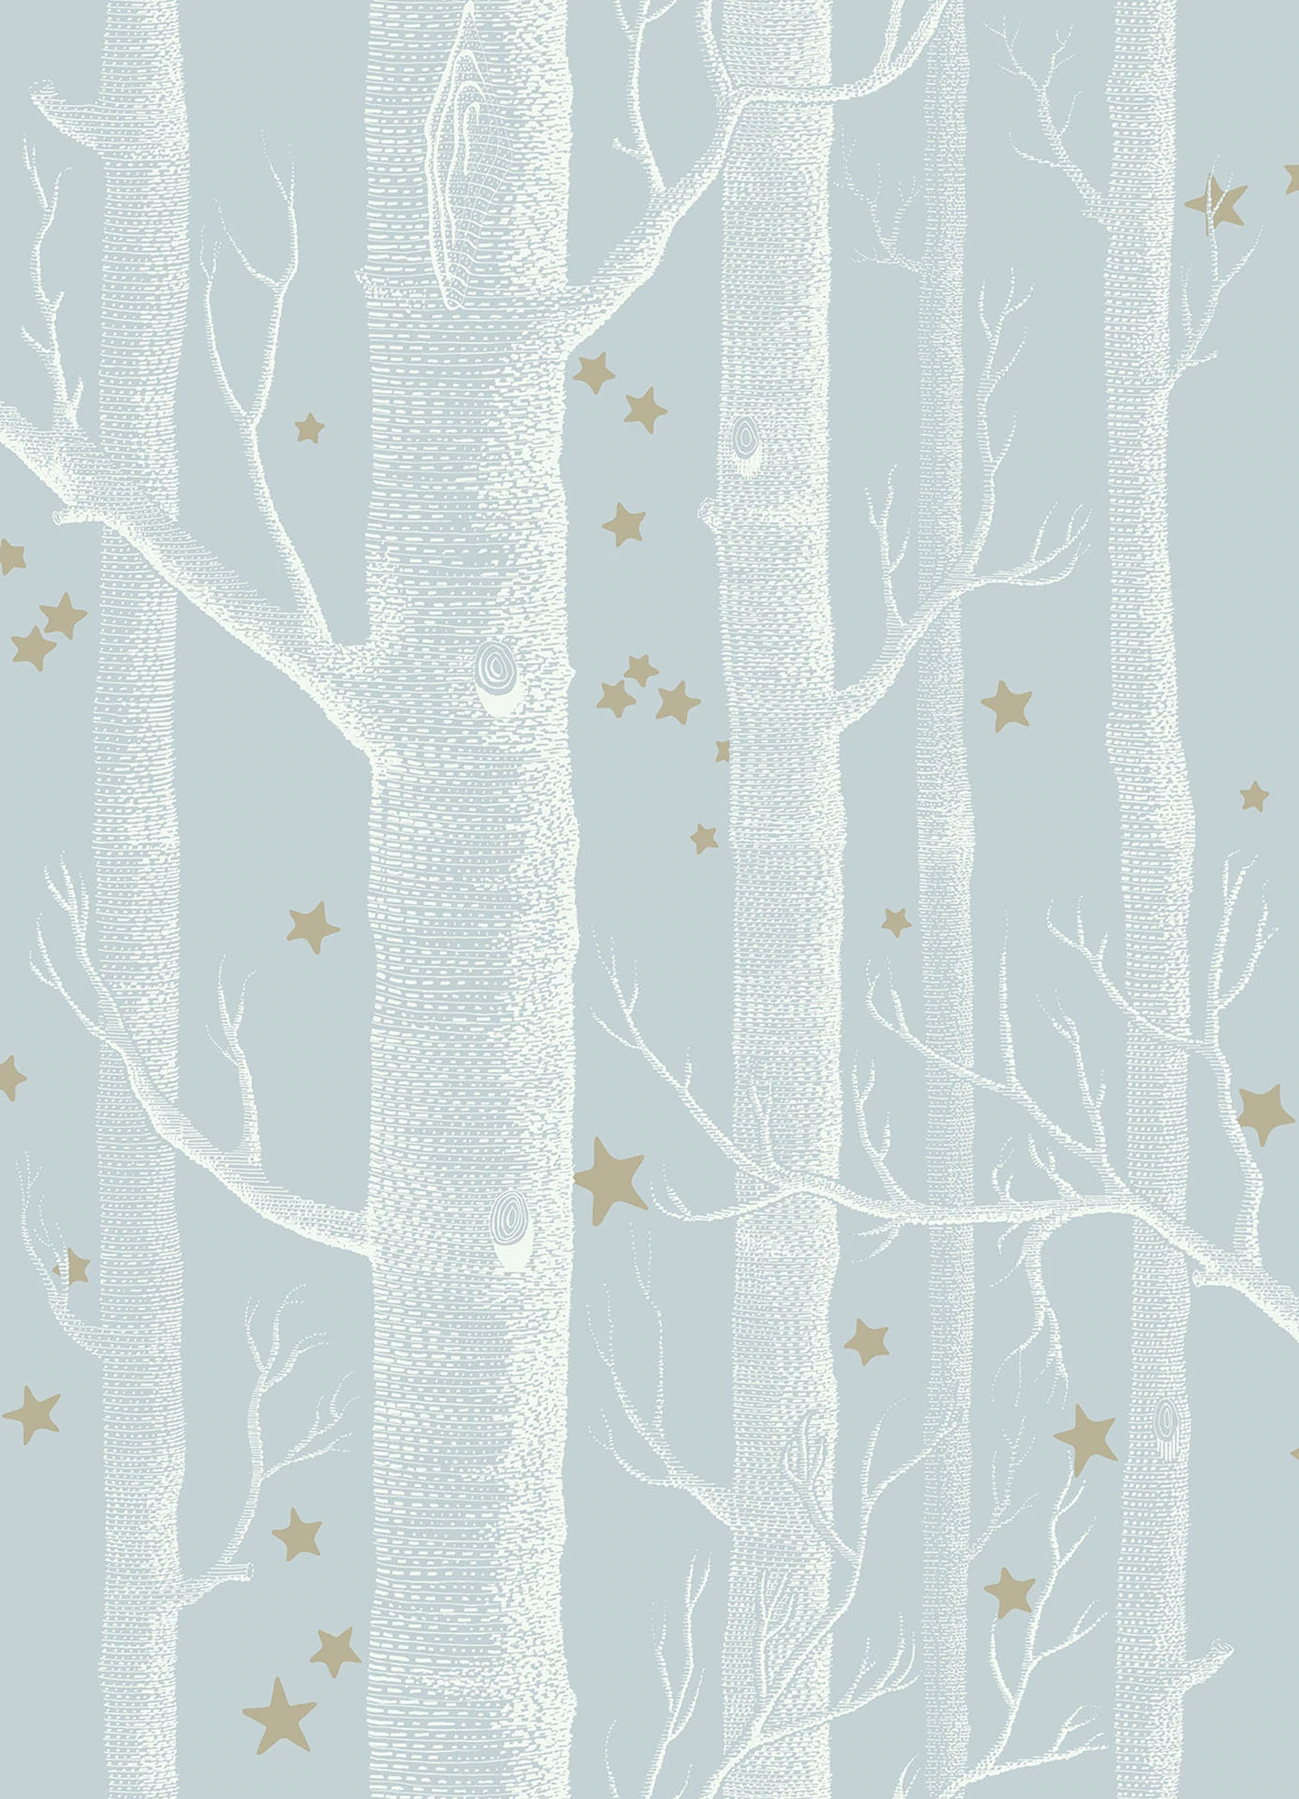 Woods & Stars Tapete - 103/11051 - Cole&Son - Whimsical